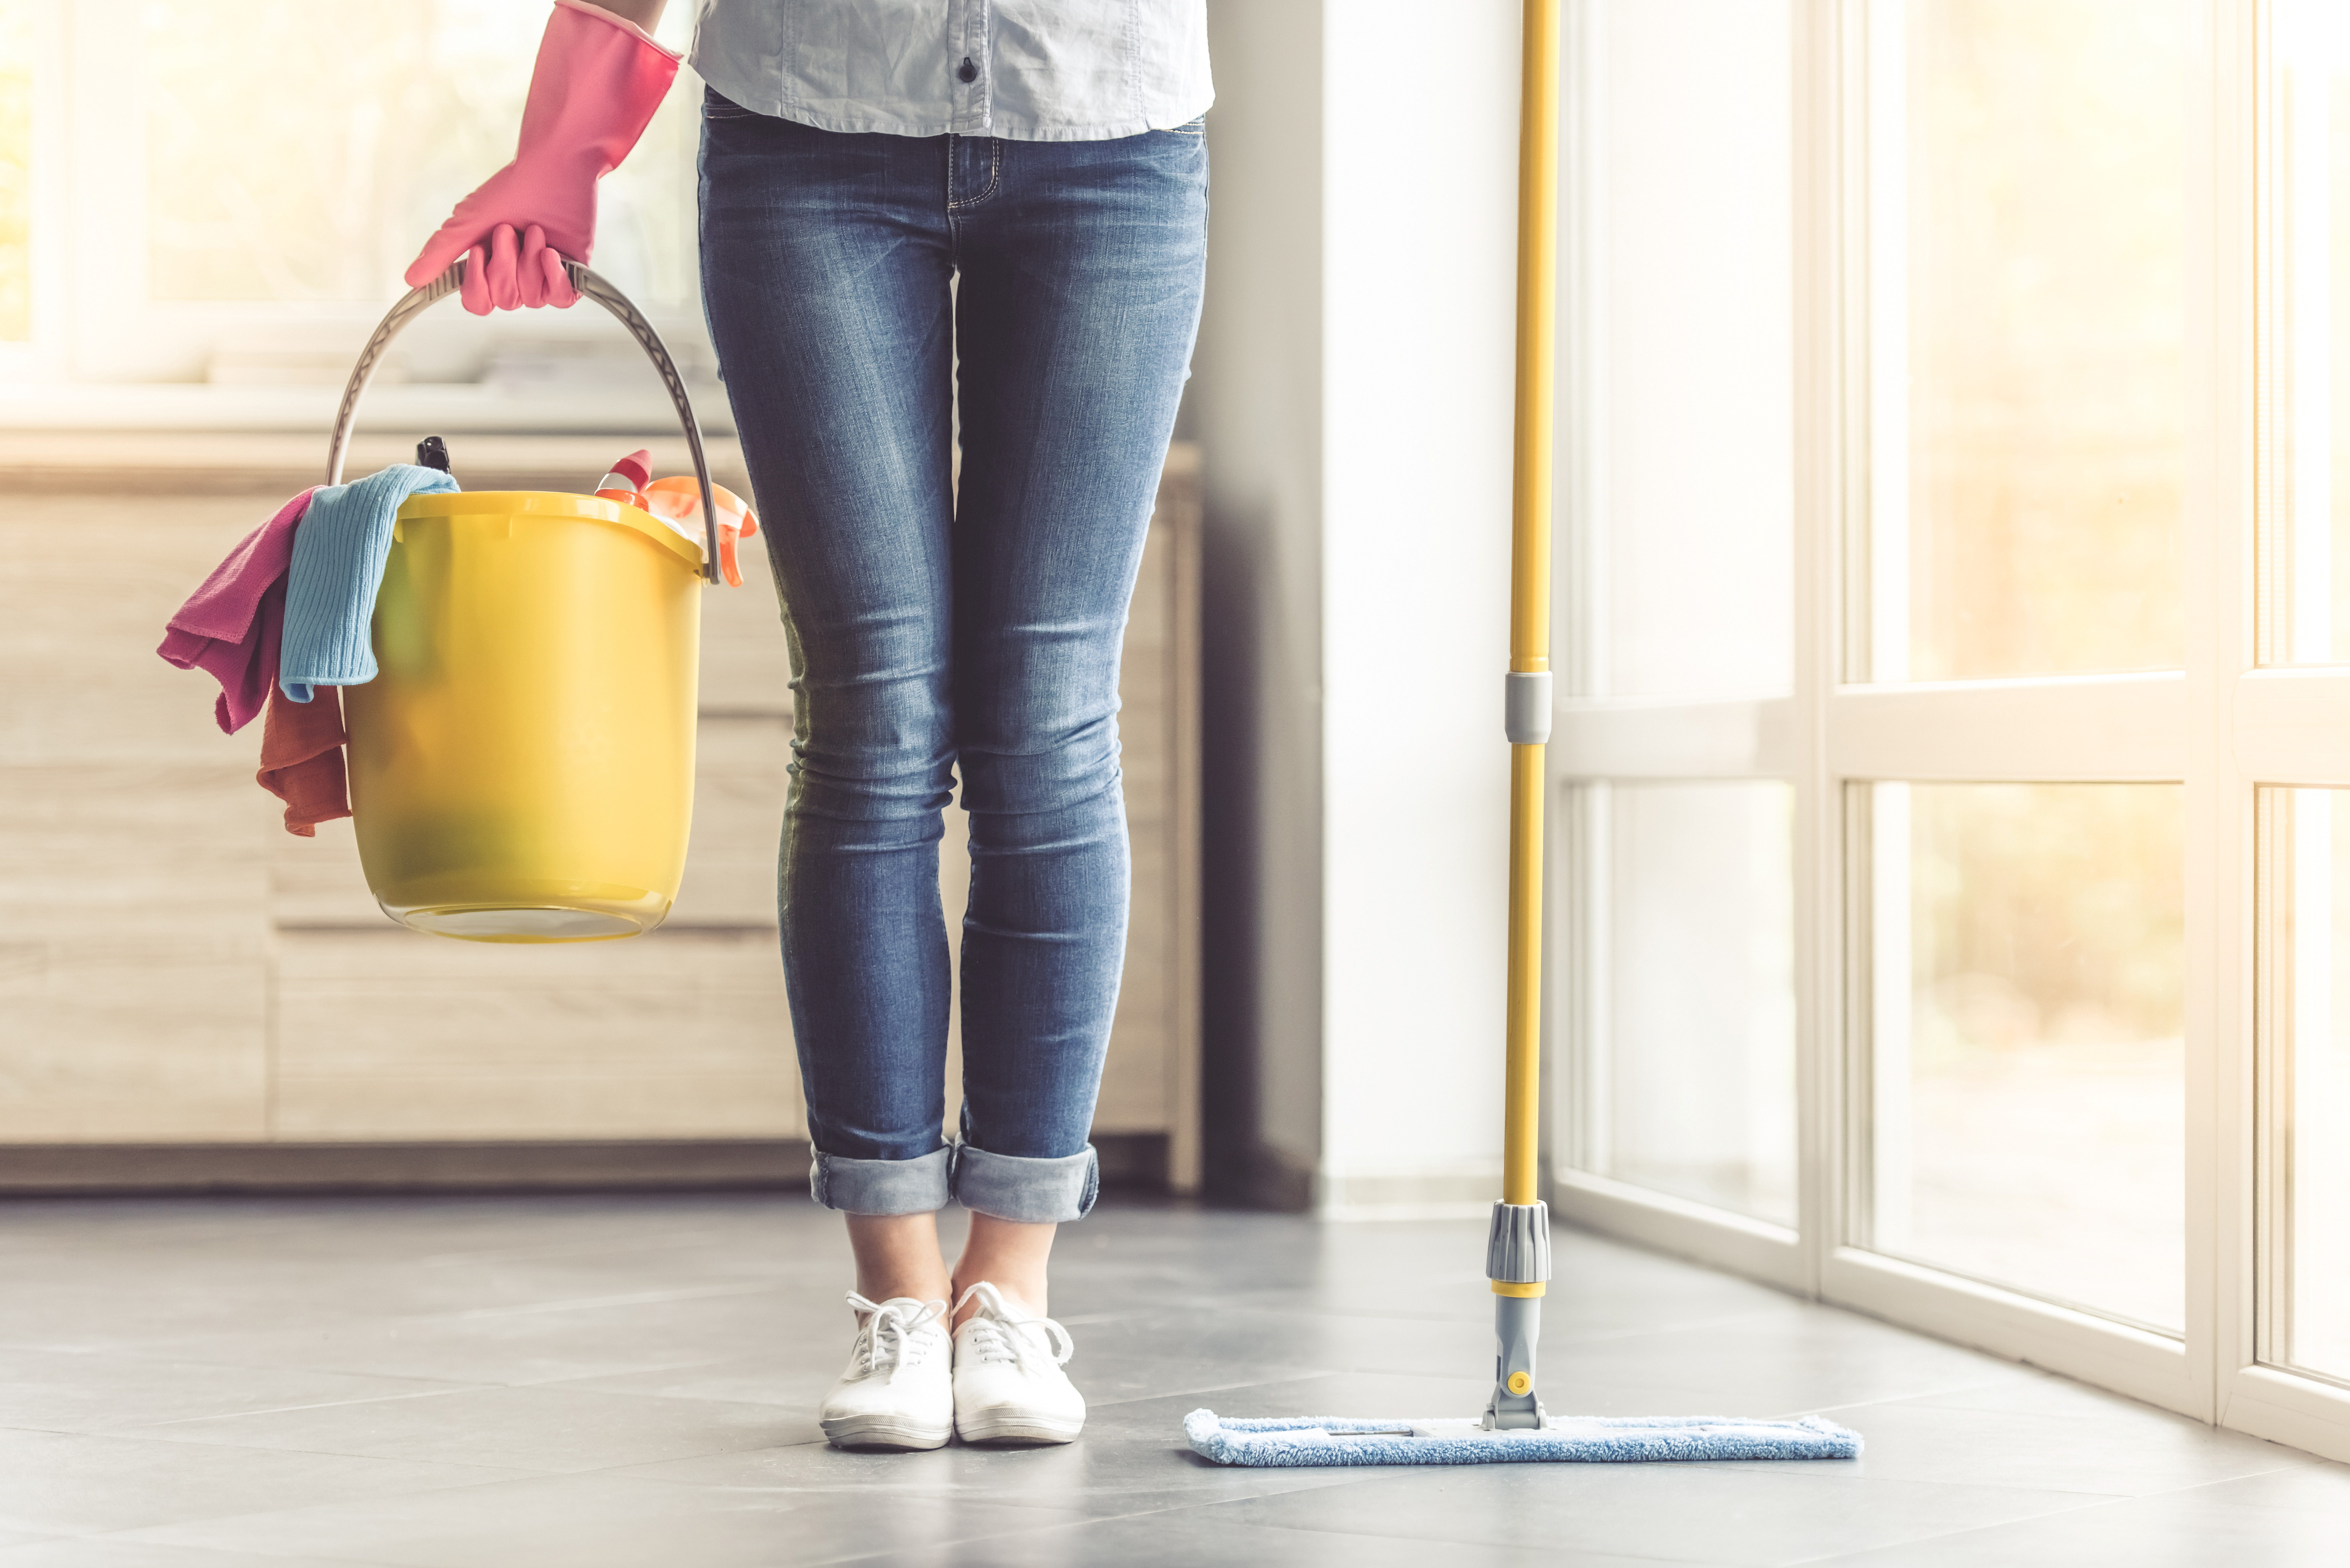 We show you how to clean your flooring properly!